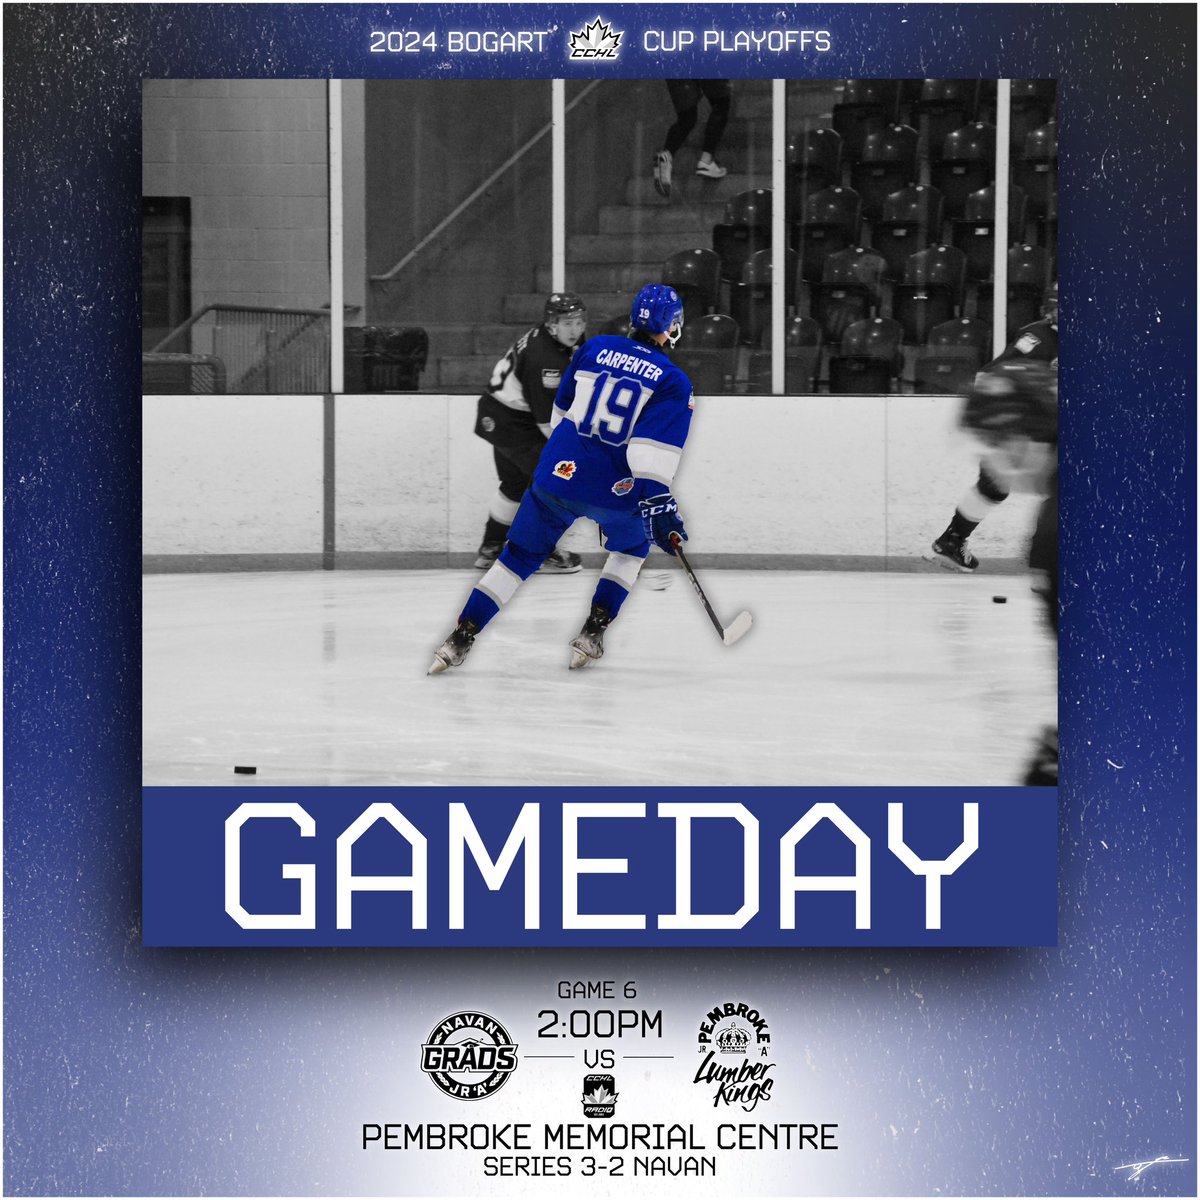 🔵⚪️GAMEDAY⚪️🔵 It’s time for Game 6! As the boys are on the afternoon trip to Pembroke to try & close out the series against the Lumber Kings, this isn’t one you’re gonna wanna miss folks! GAMETIME 2:00! #navan #pembroke #cchl #rollgrads #wearenavan #playoffs #2024bogartcup